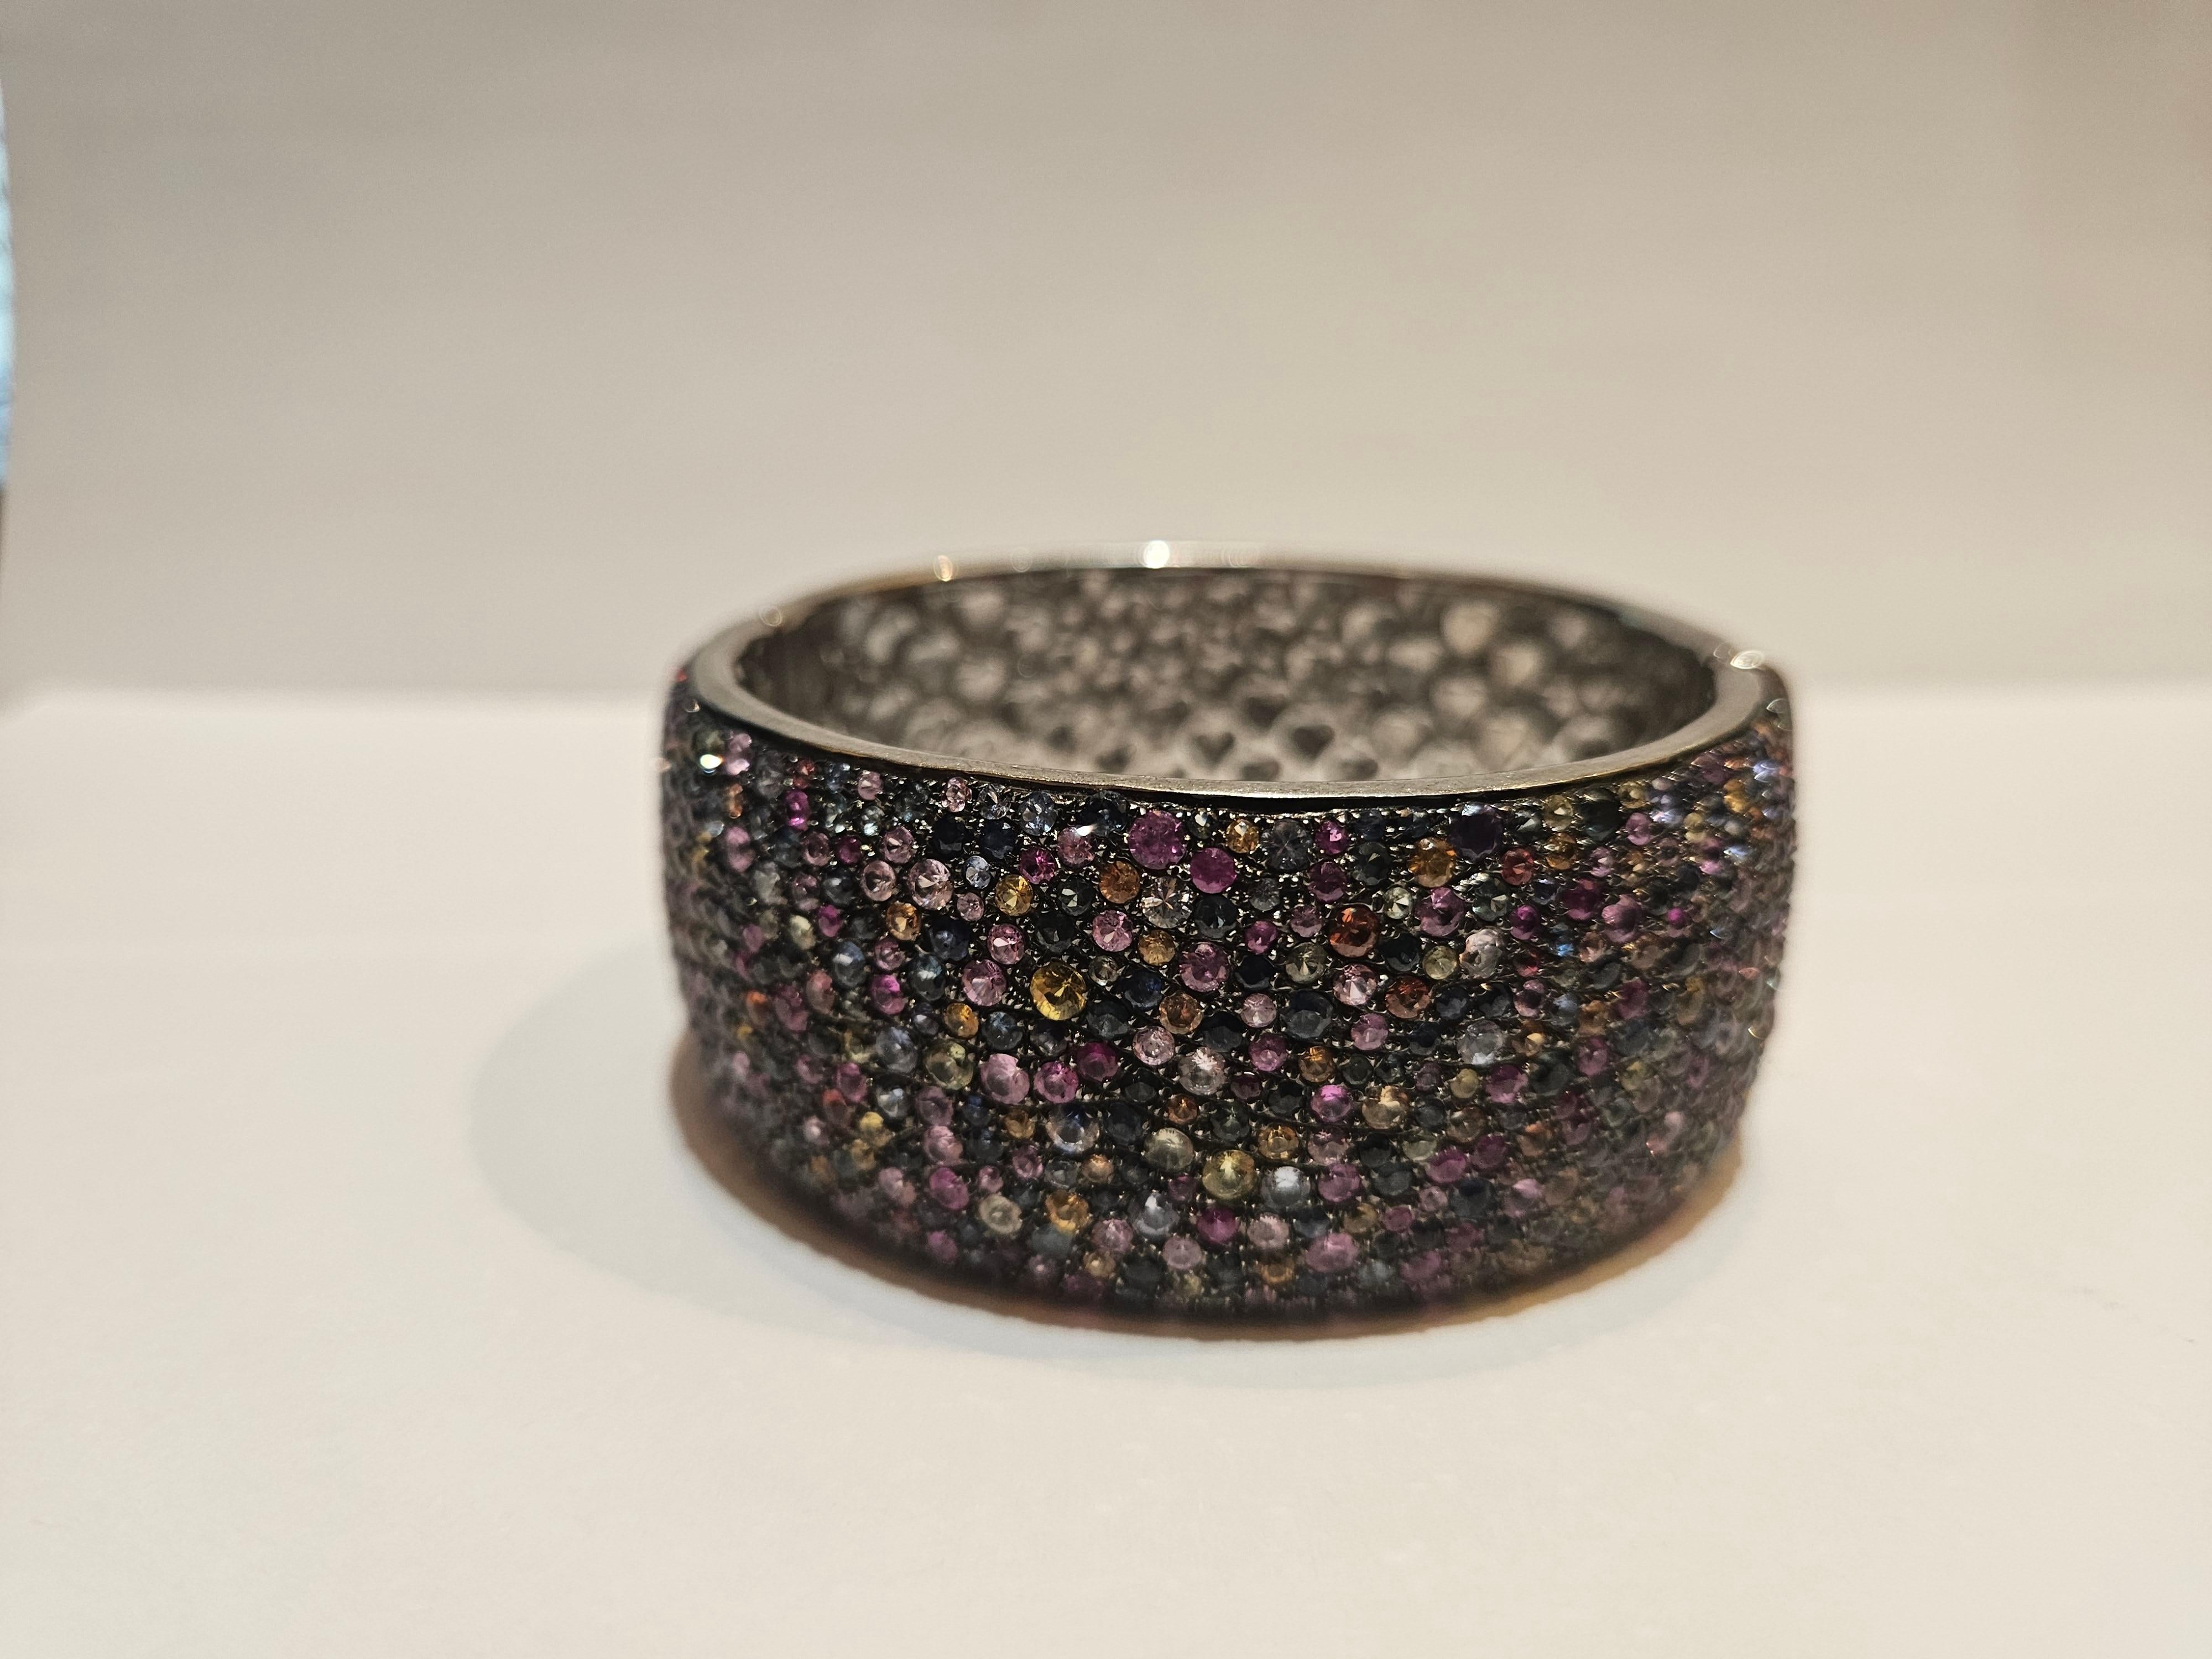 The Following Item we are offering is this Rare Magnificent FANCY RAINBOW SAPPHIRE STERLING SILVER CUFF BANGLE BRACELET WITH APPROX 27CTS OF RAINBOW SAPPHIRES!!! This Magnificent Bangle is a Rare Sample Piece that were sold in select Five Star